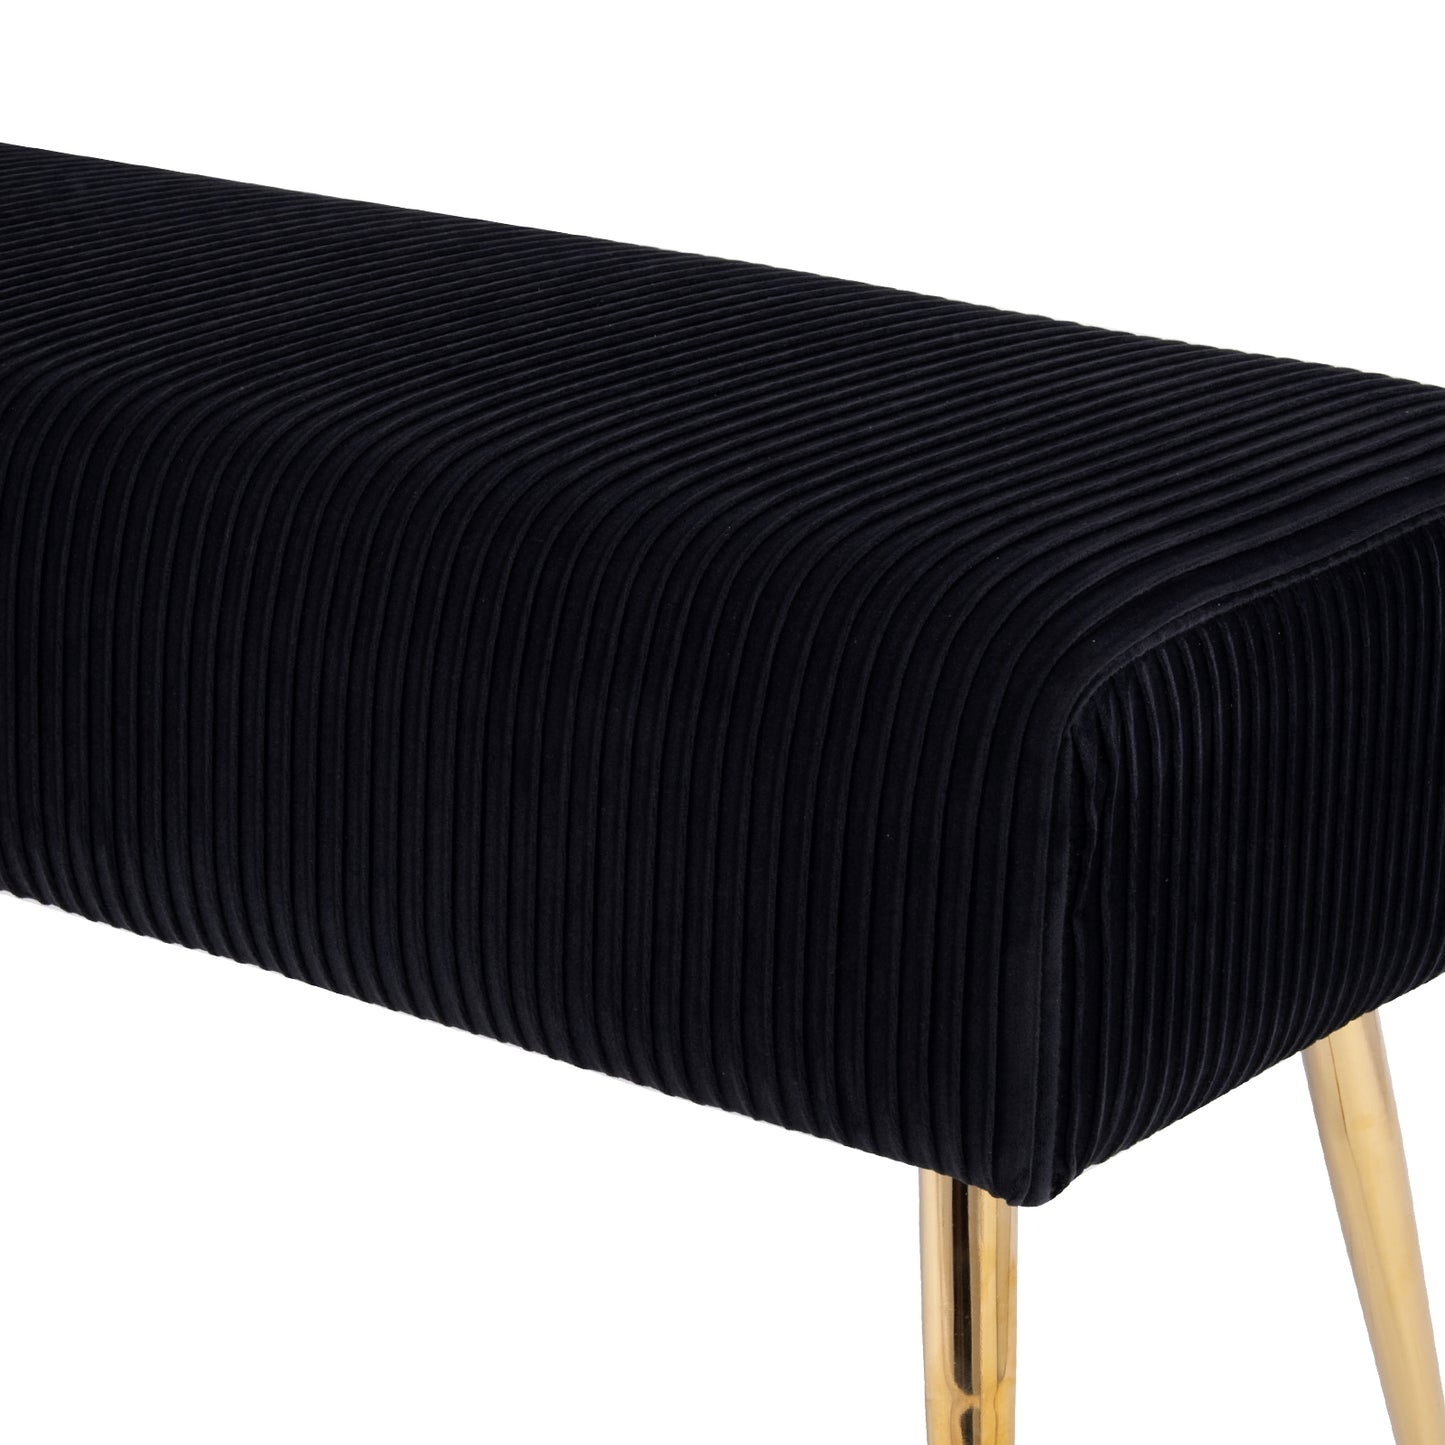 SYNGAR Upholstered Bench, Mid Century Modern Rectangular Footrest for Bedroom Entryway Channel, Velvet Fabric Bench for Bedroom End of Bed, Entryway Ottoman Bench with Gold Metal Legs, Black